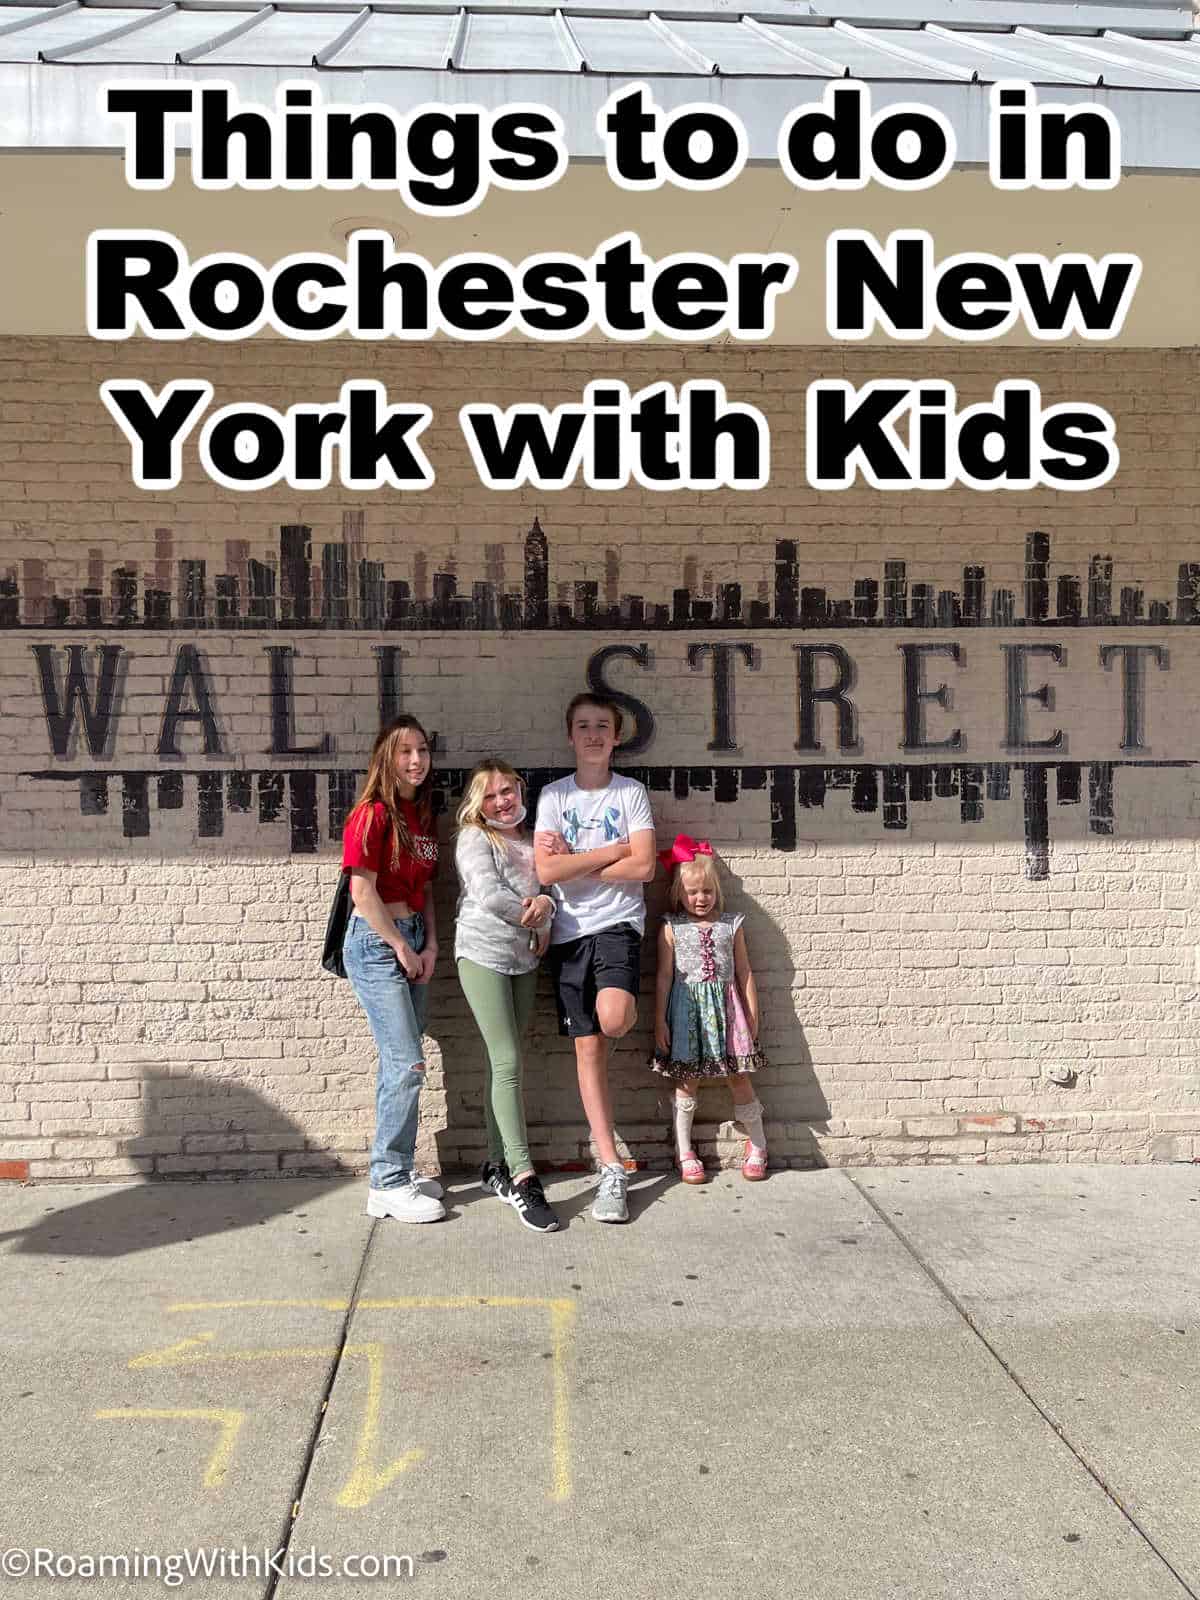 Things to do in Rochester New York with Kids